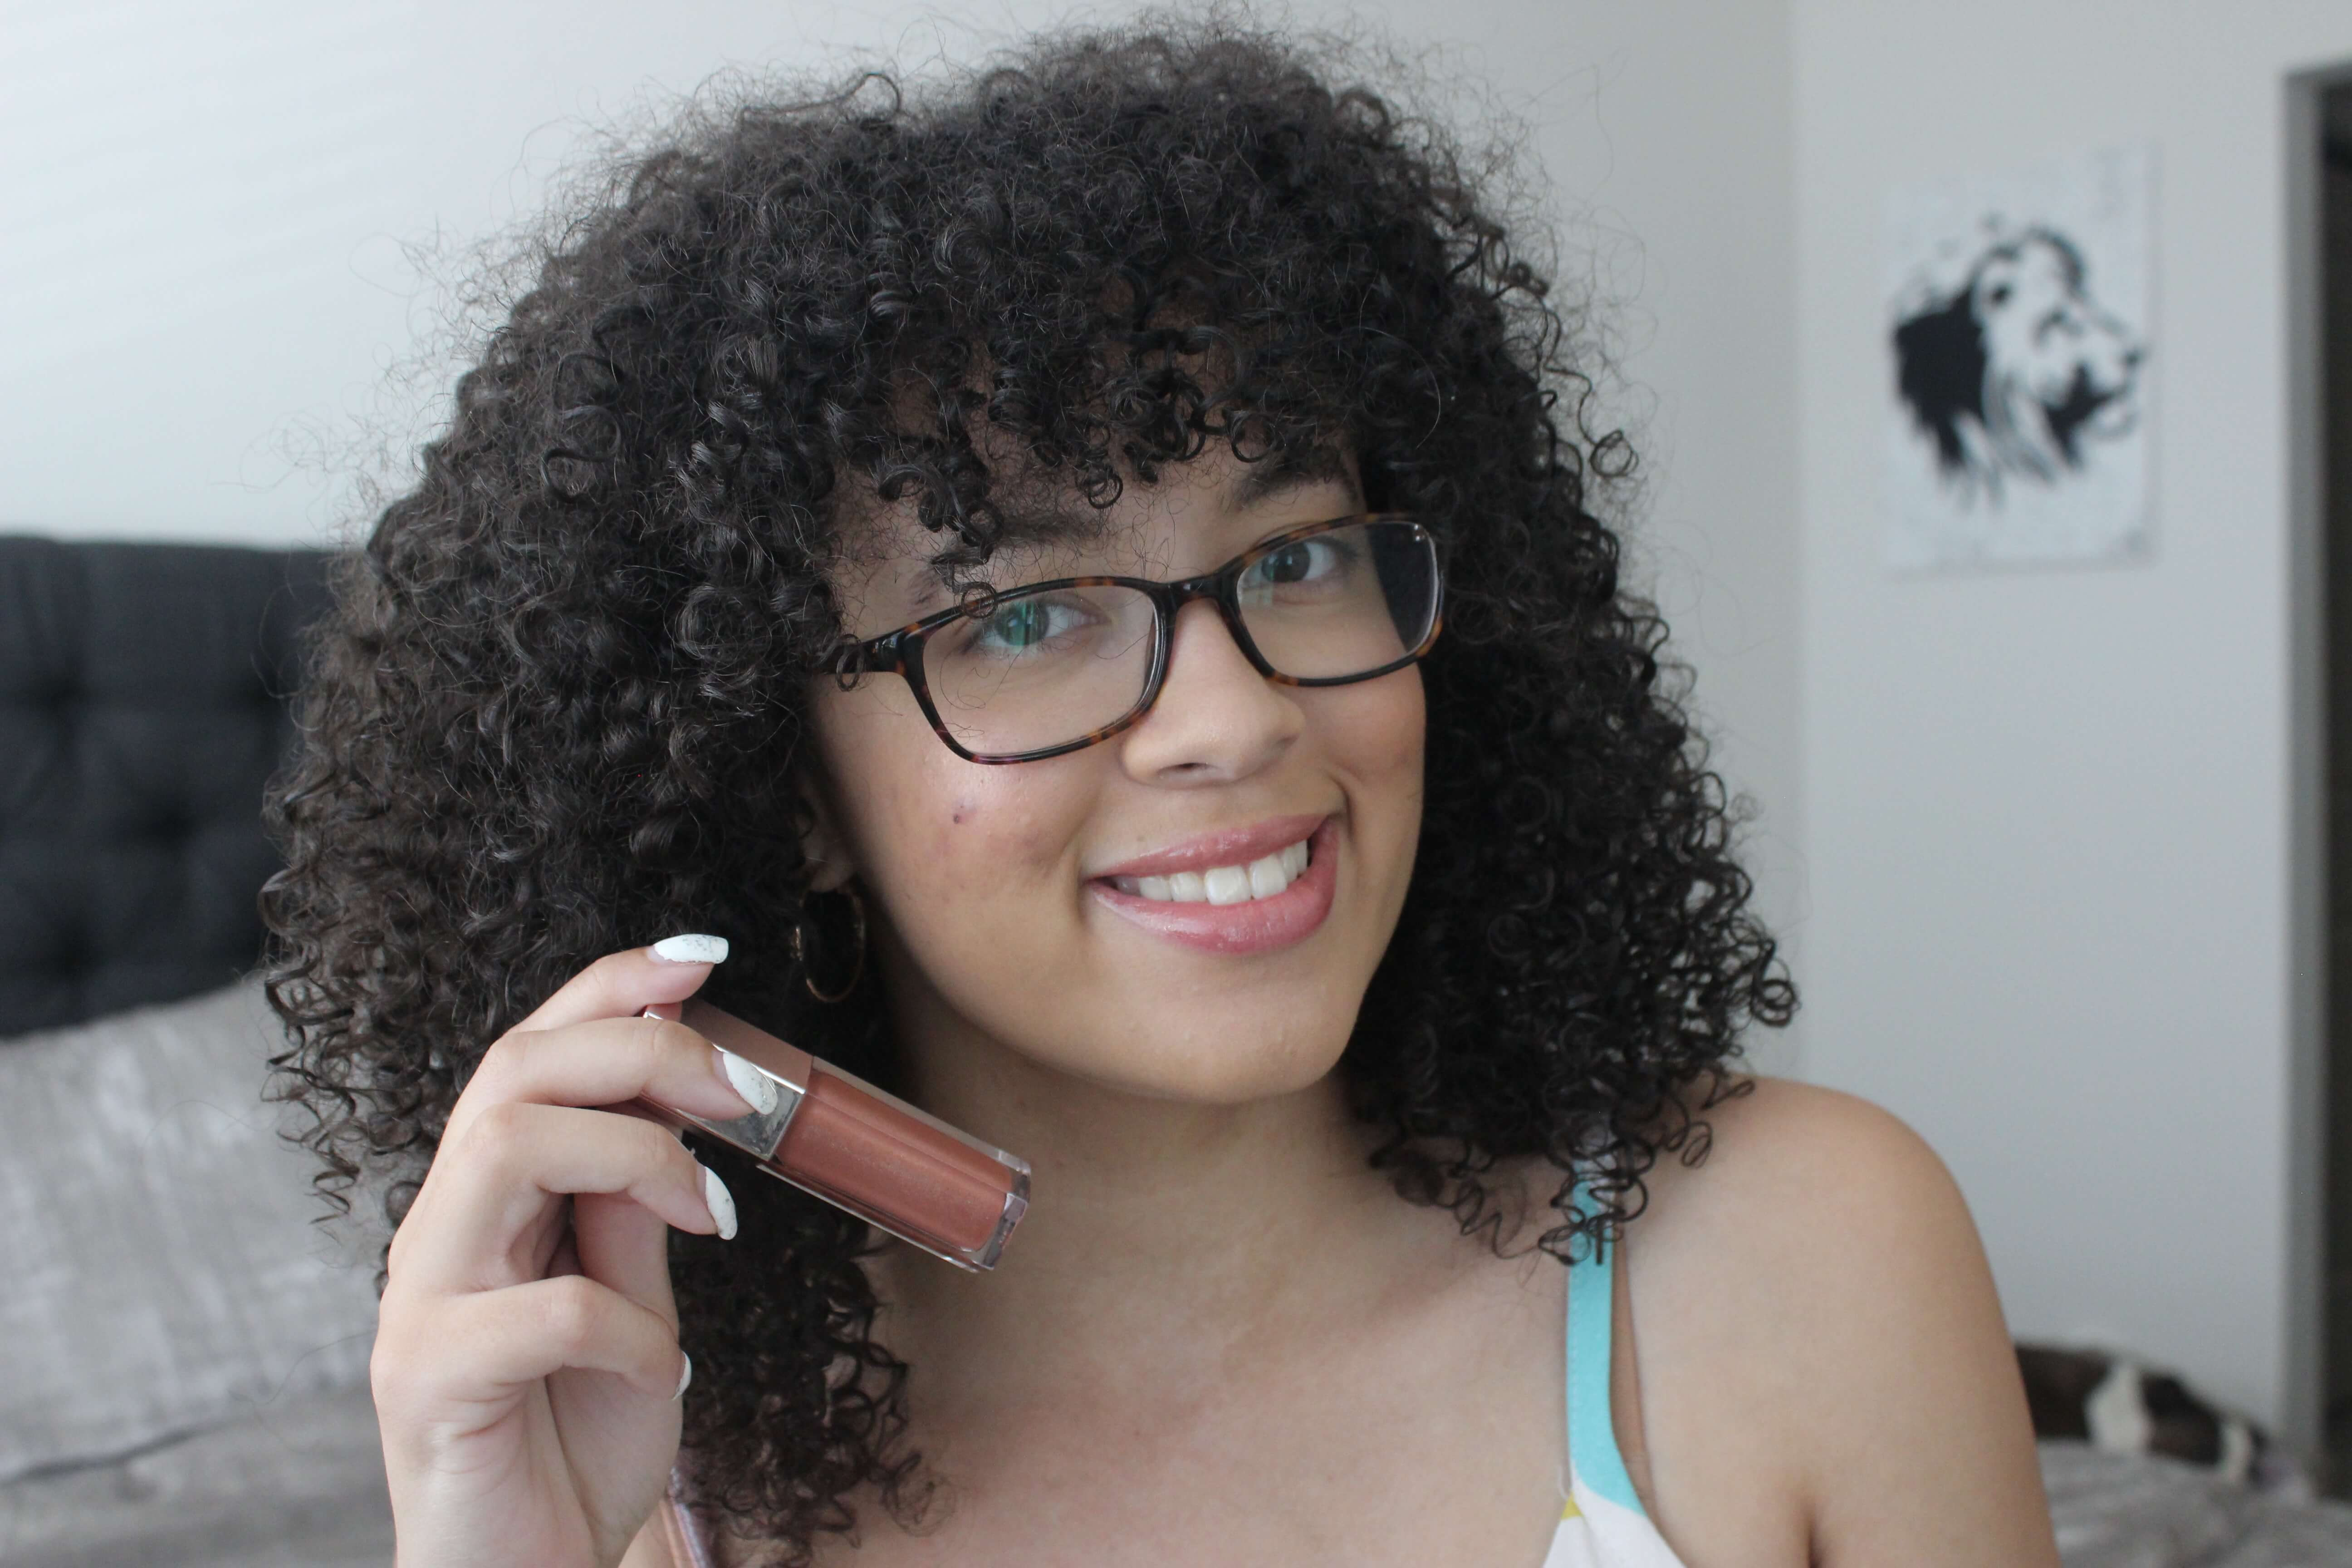 Nude lip products are my go-to for a simple, easy makeup look or whenever I’m going for a bold eye makeup. I’m sharing today my top 6 favorite nude lip products, from glosses to lipsticks. These are perfect shades if you are light-medium tan skin color! 